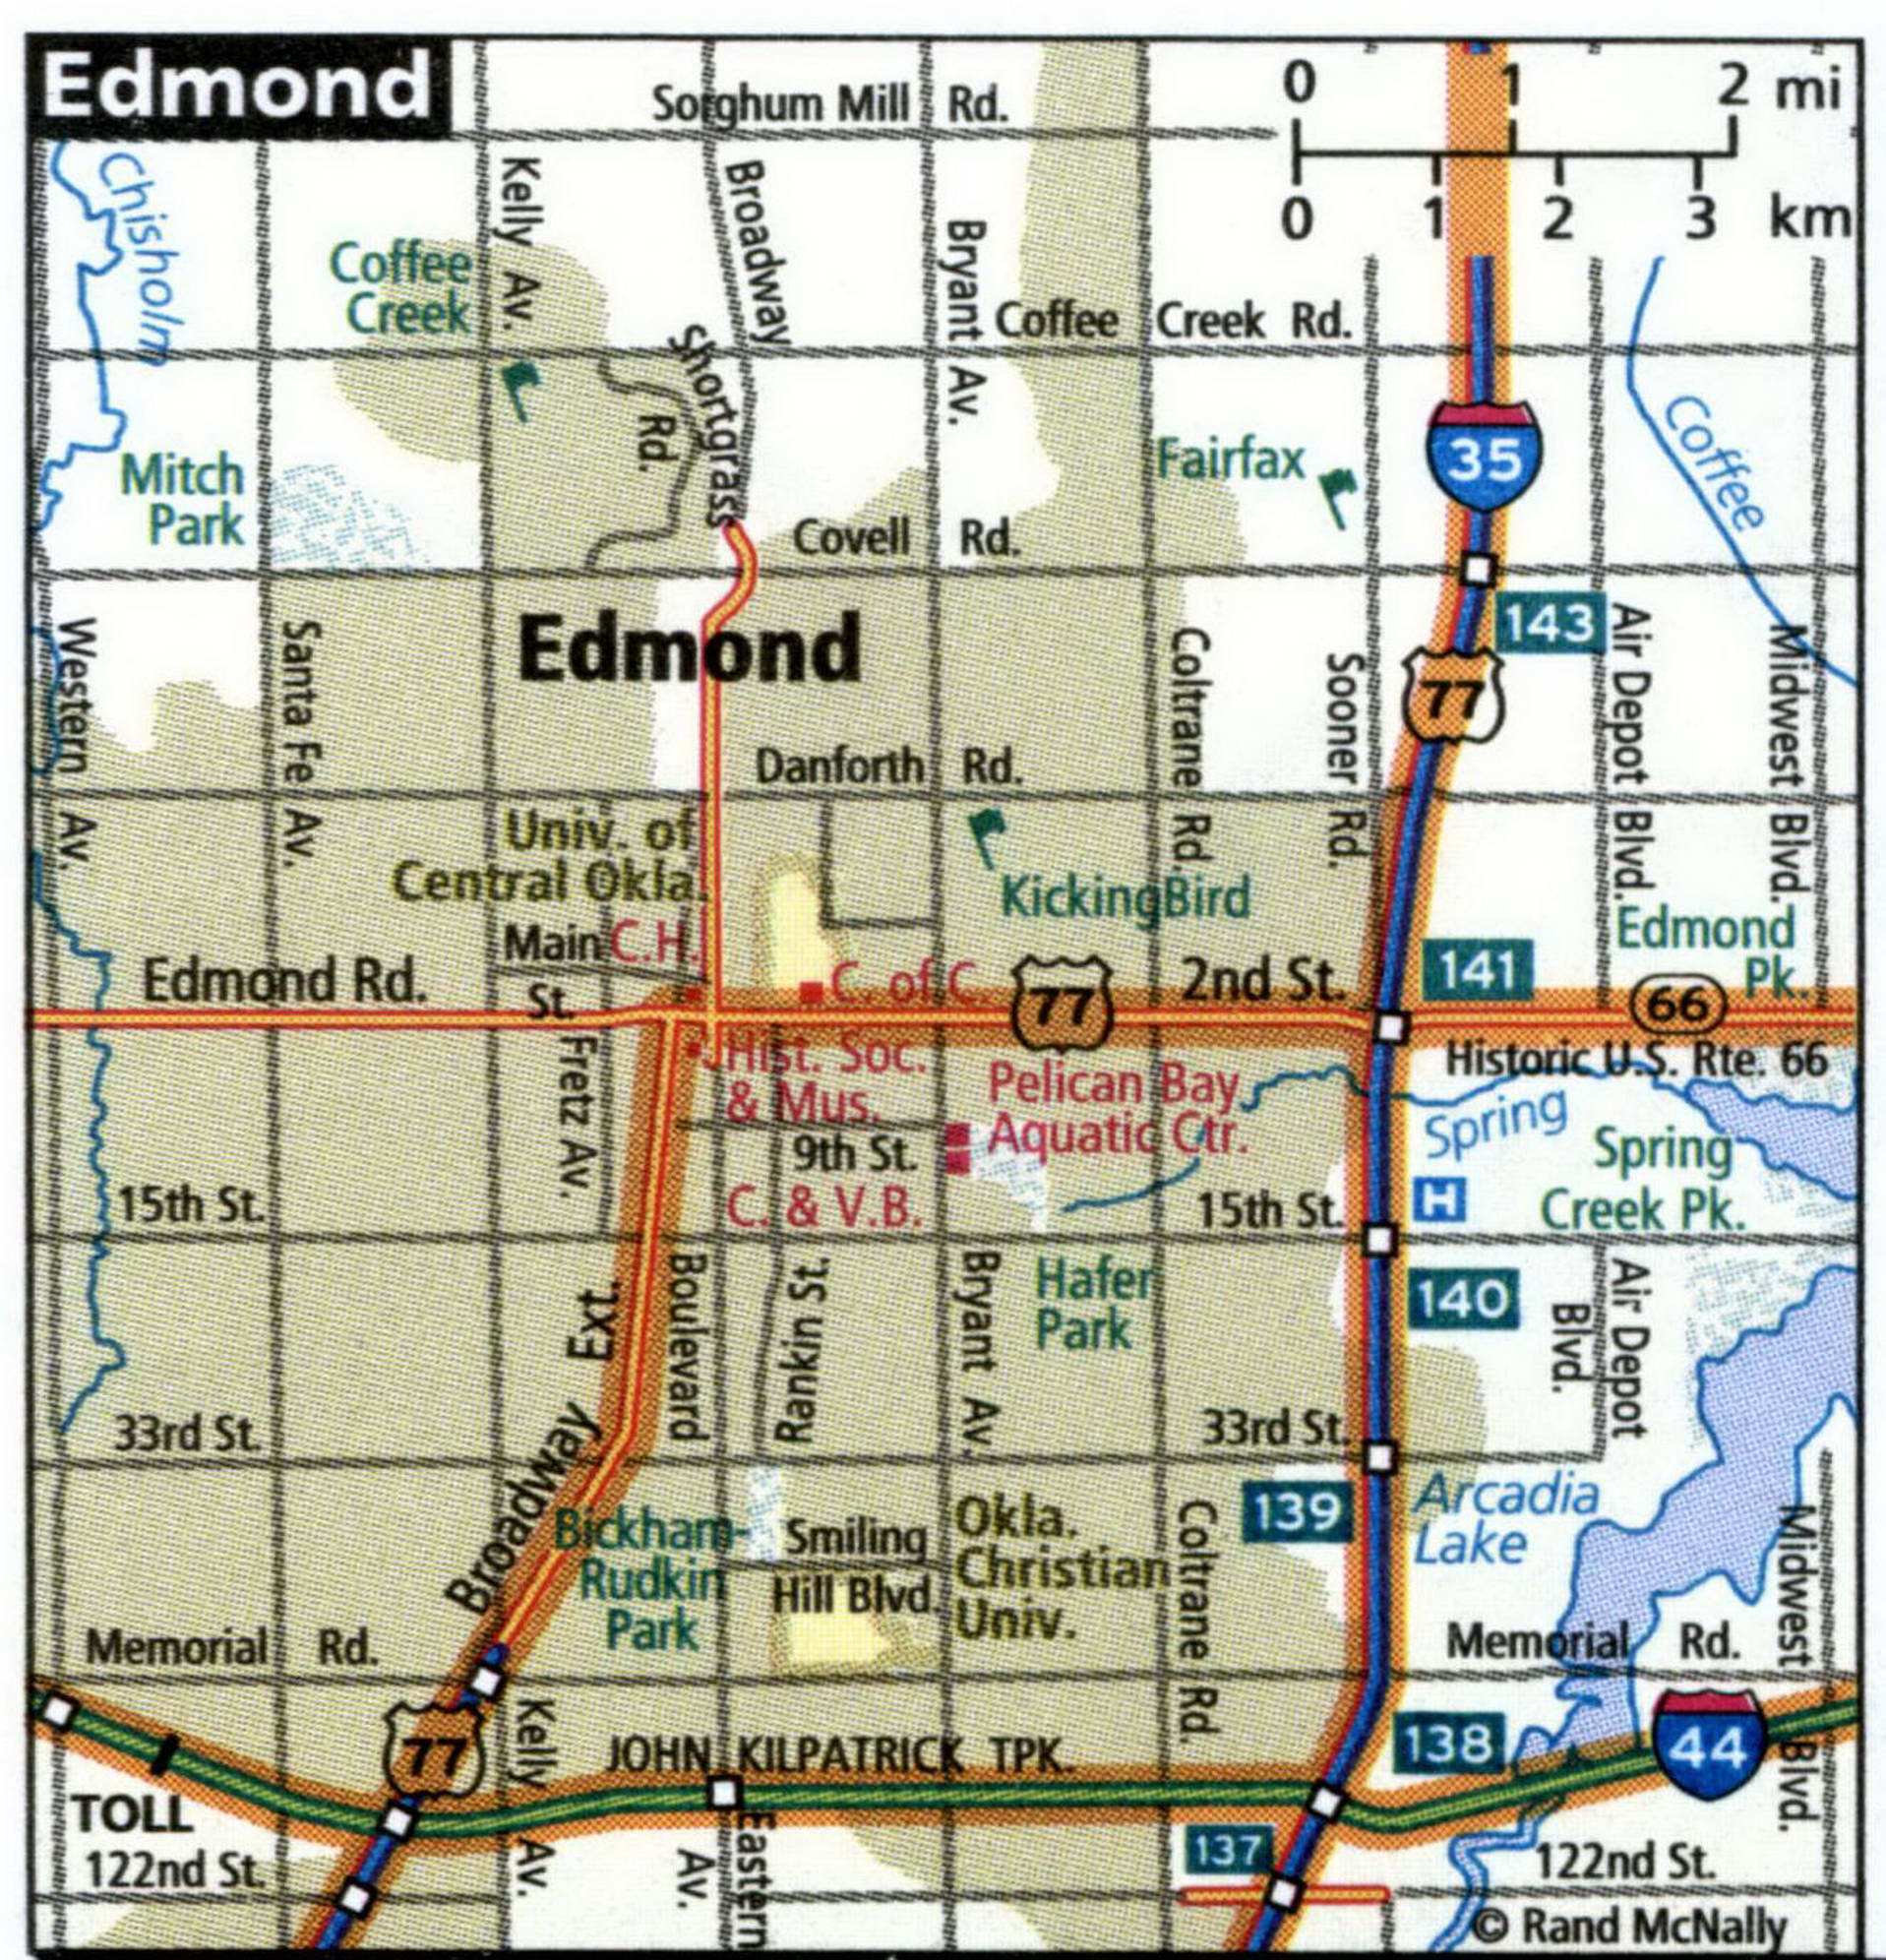 Edmond city map for truckers